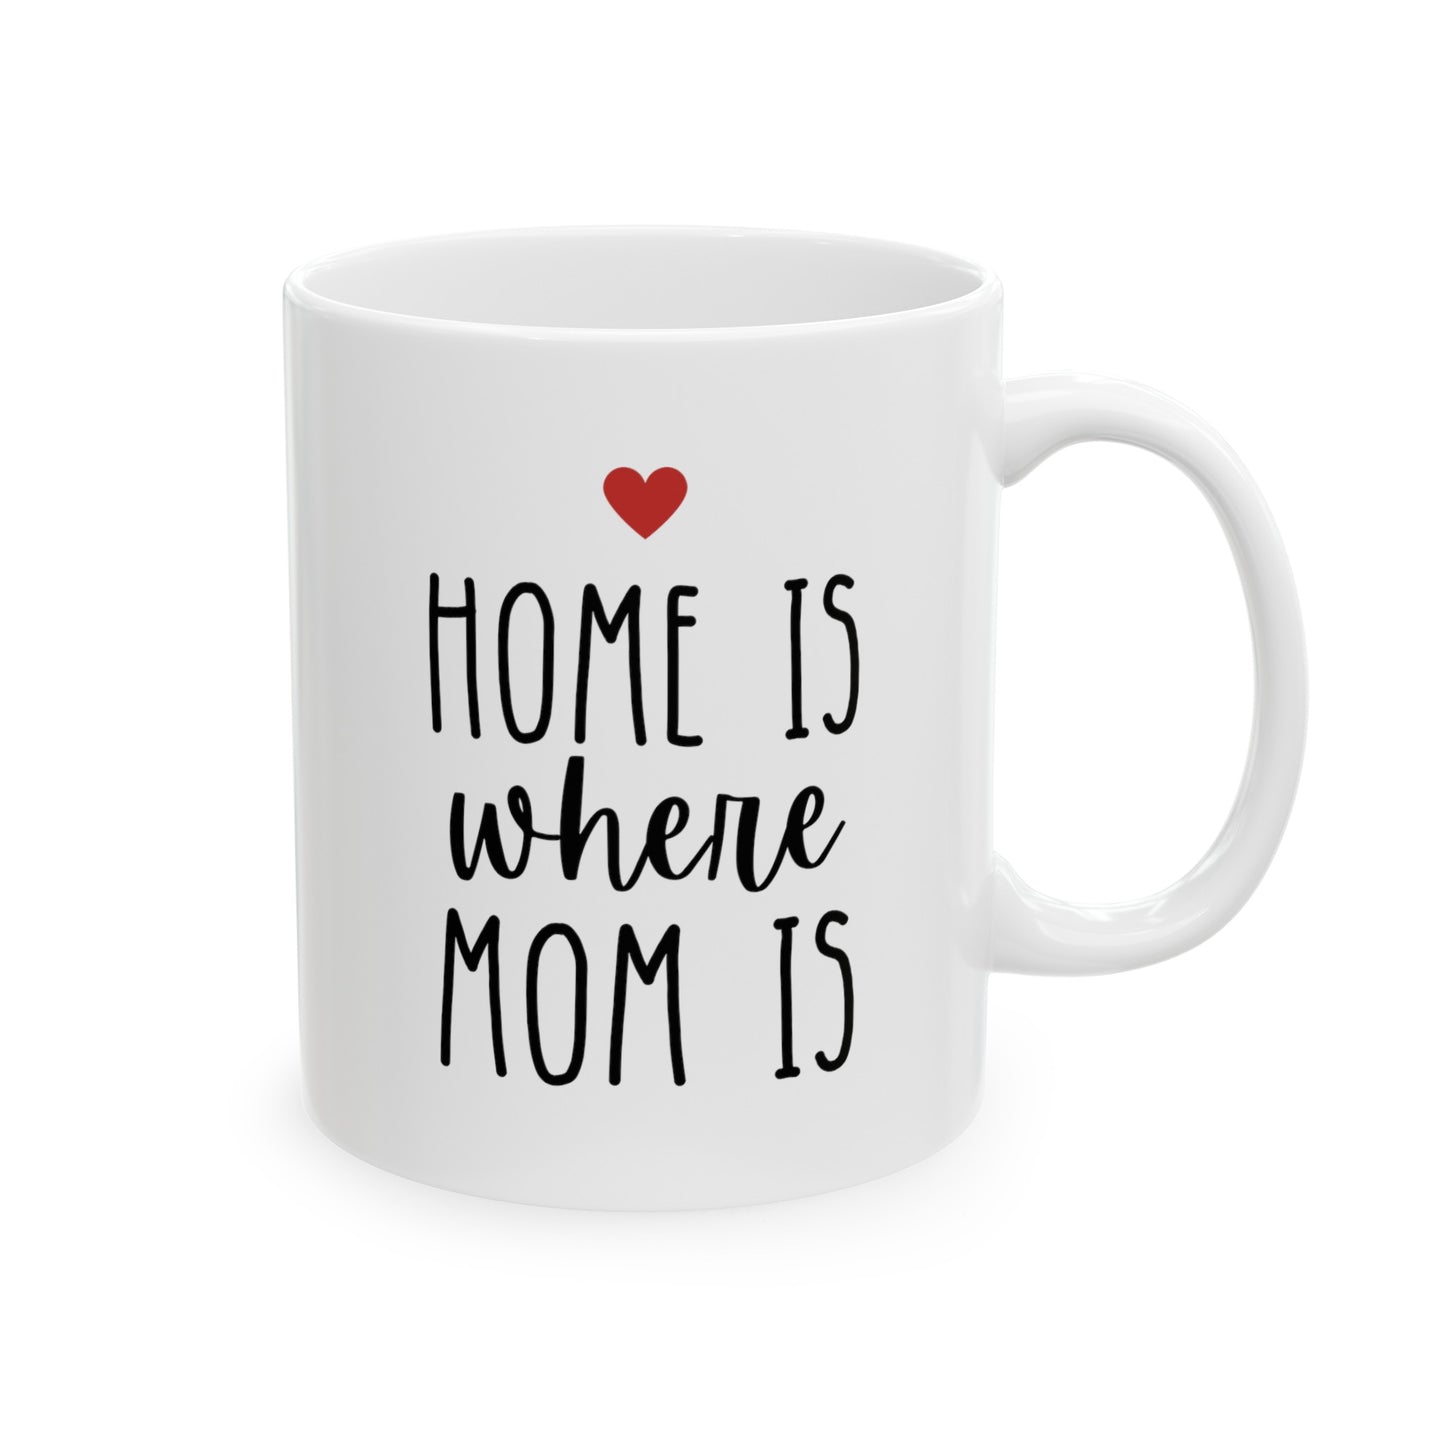 Home Is Where Mom Is 11oz white funny coffee mug tea cup gift for mother's day moving states away housewarming long distance mum waveywares wavey wares wavywares wavy wares